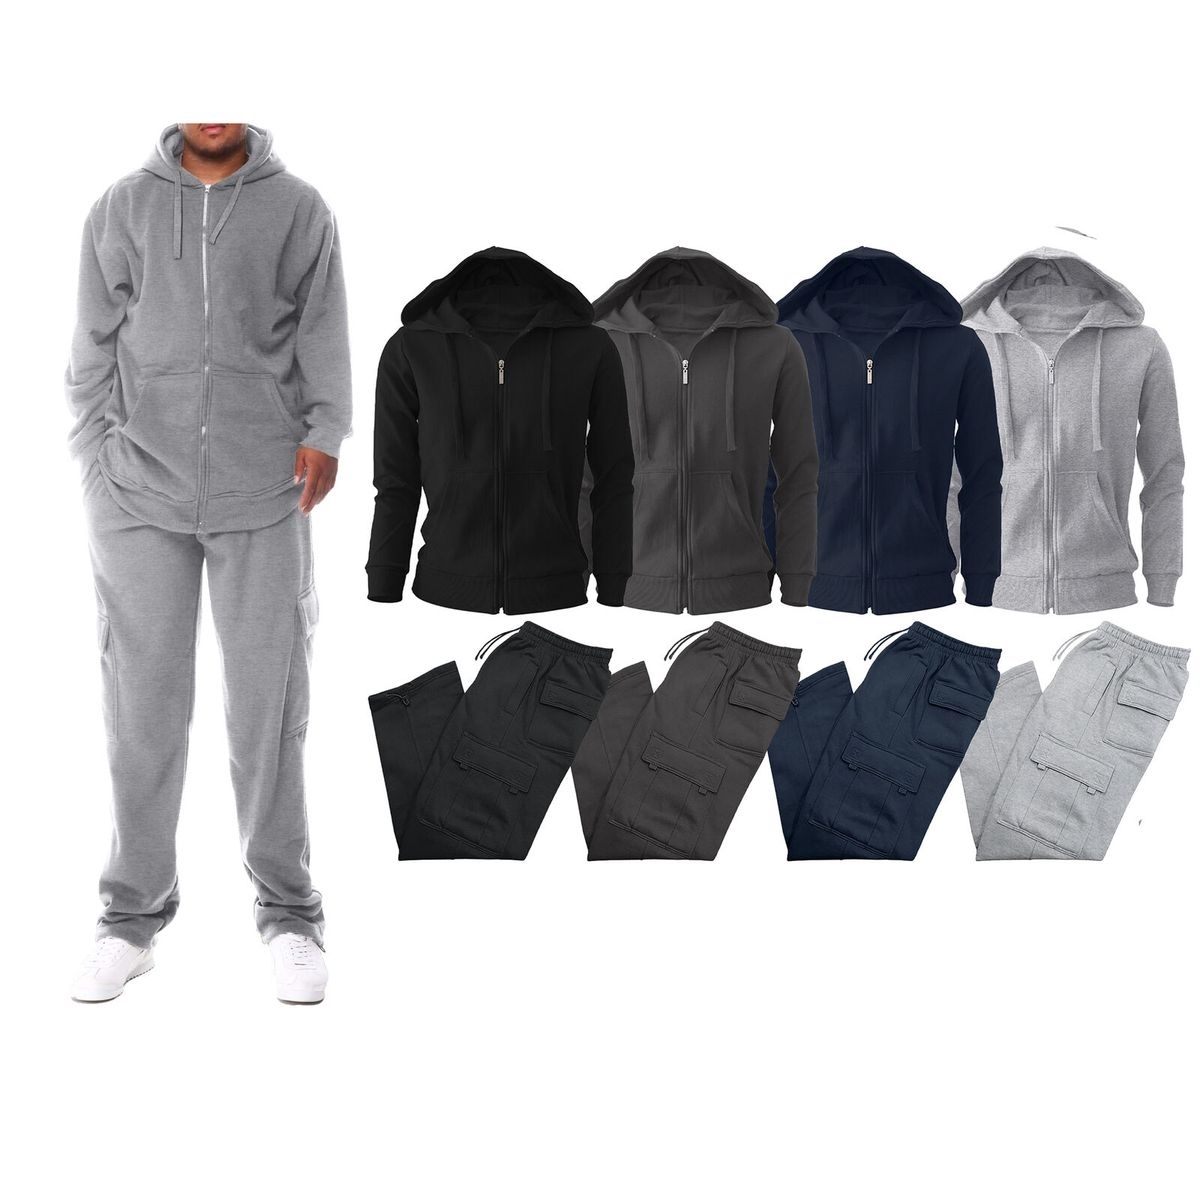 Multi-Pack: Men's Big & Tall Winter Warm Athletic Active Cozy Fleece Lined Multi-Pocket Full Zip Up Cargo Tracksuit - Charcoal, 1-pack, Xx-l